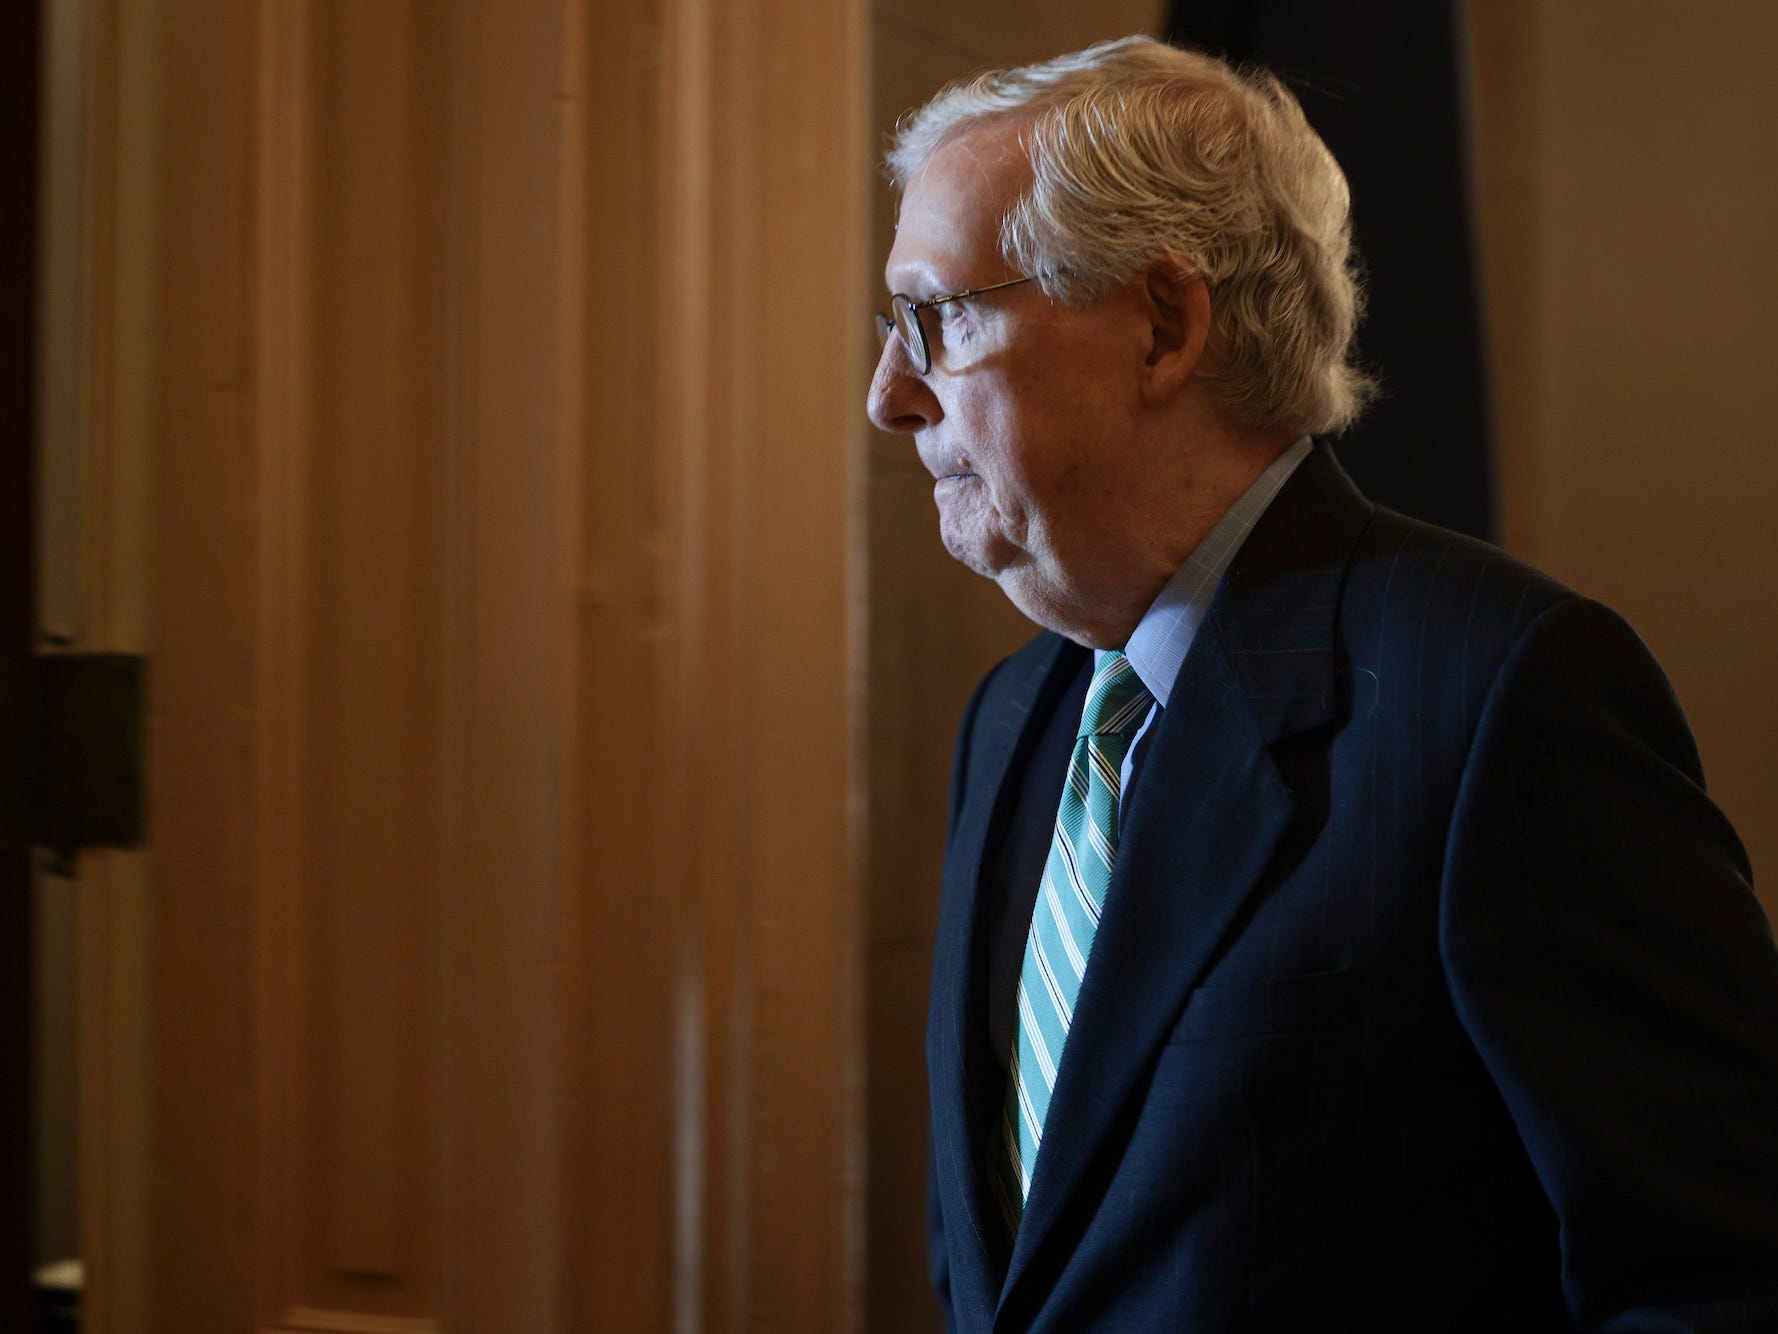 Senate Minority Leader Mitch McConnell at the US Capitol on October 07, 2021.